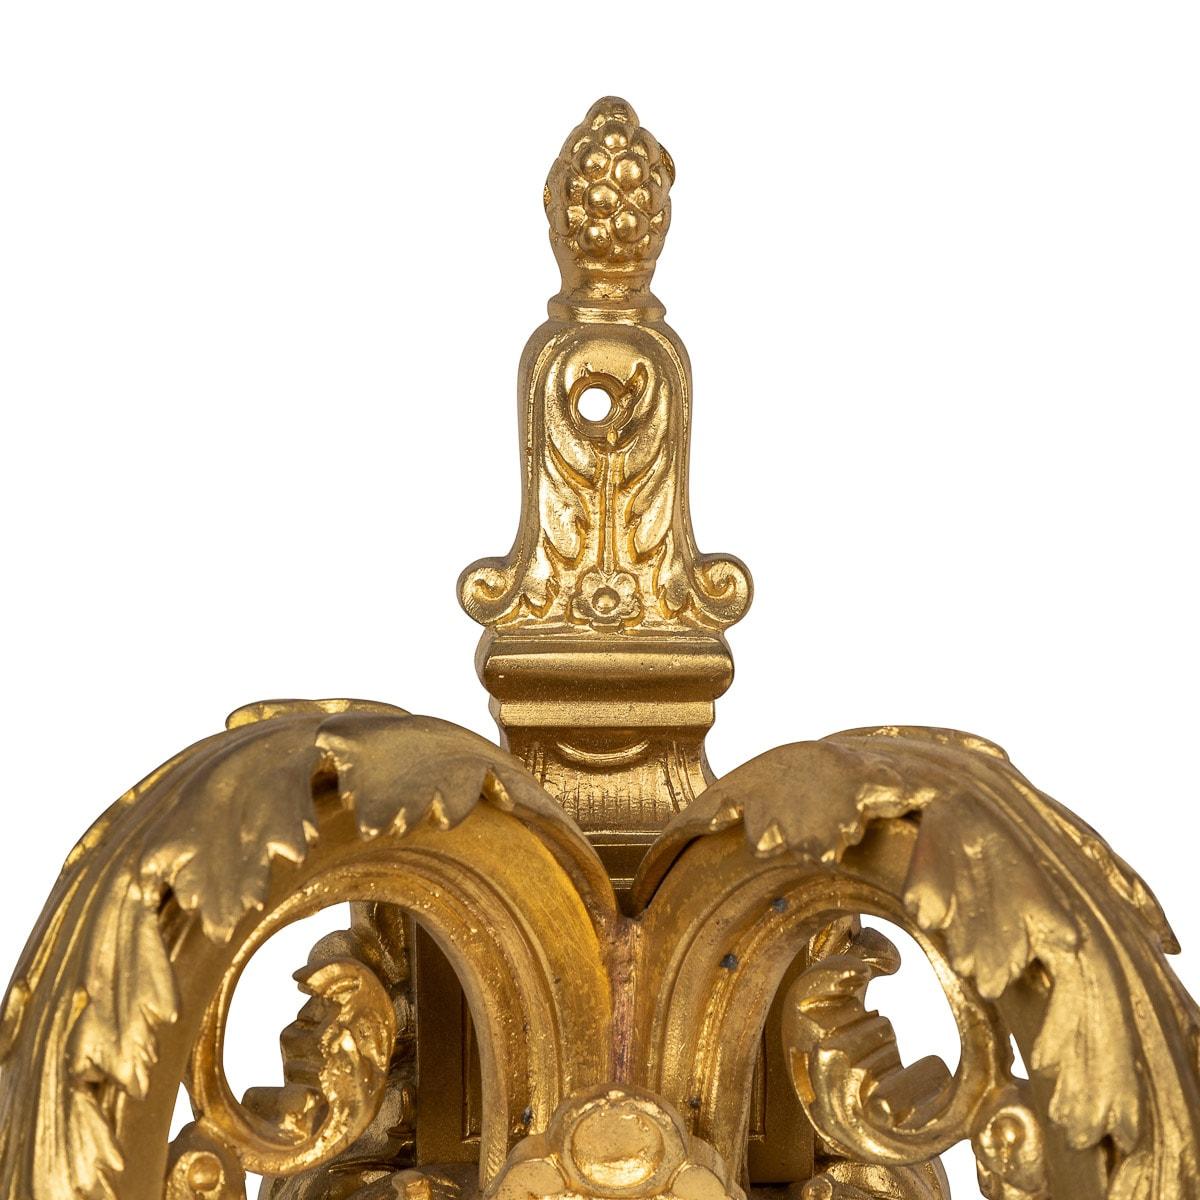 19th Century French Régence Style Ormolu D'appliques Wall Lights, C.1830 For Sale 3